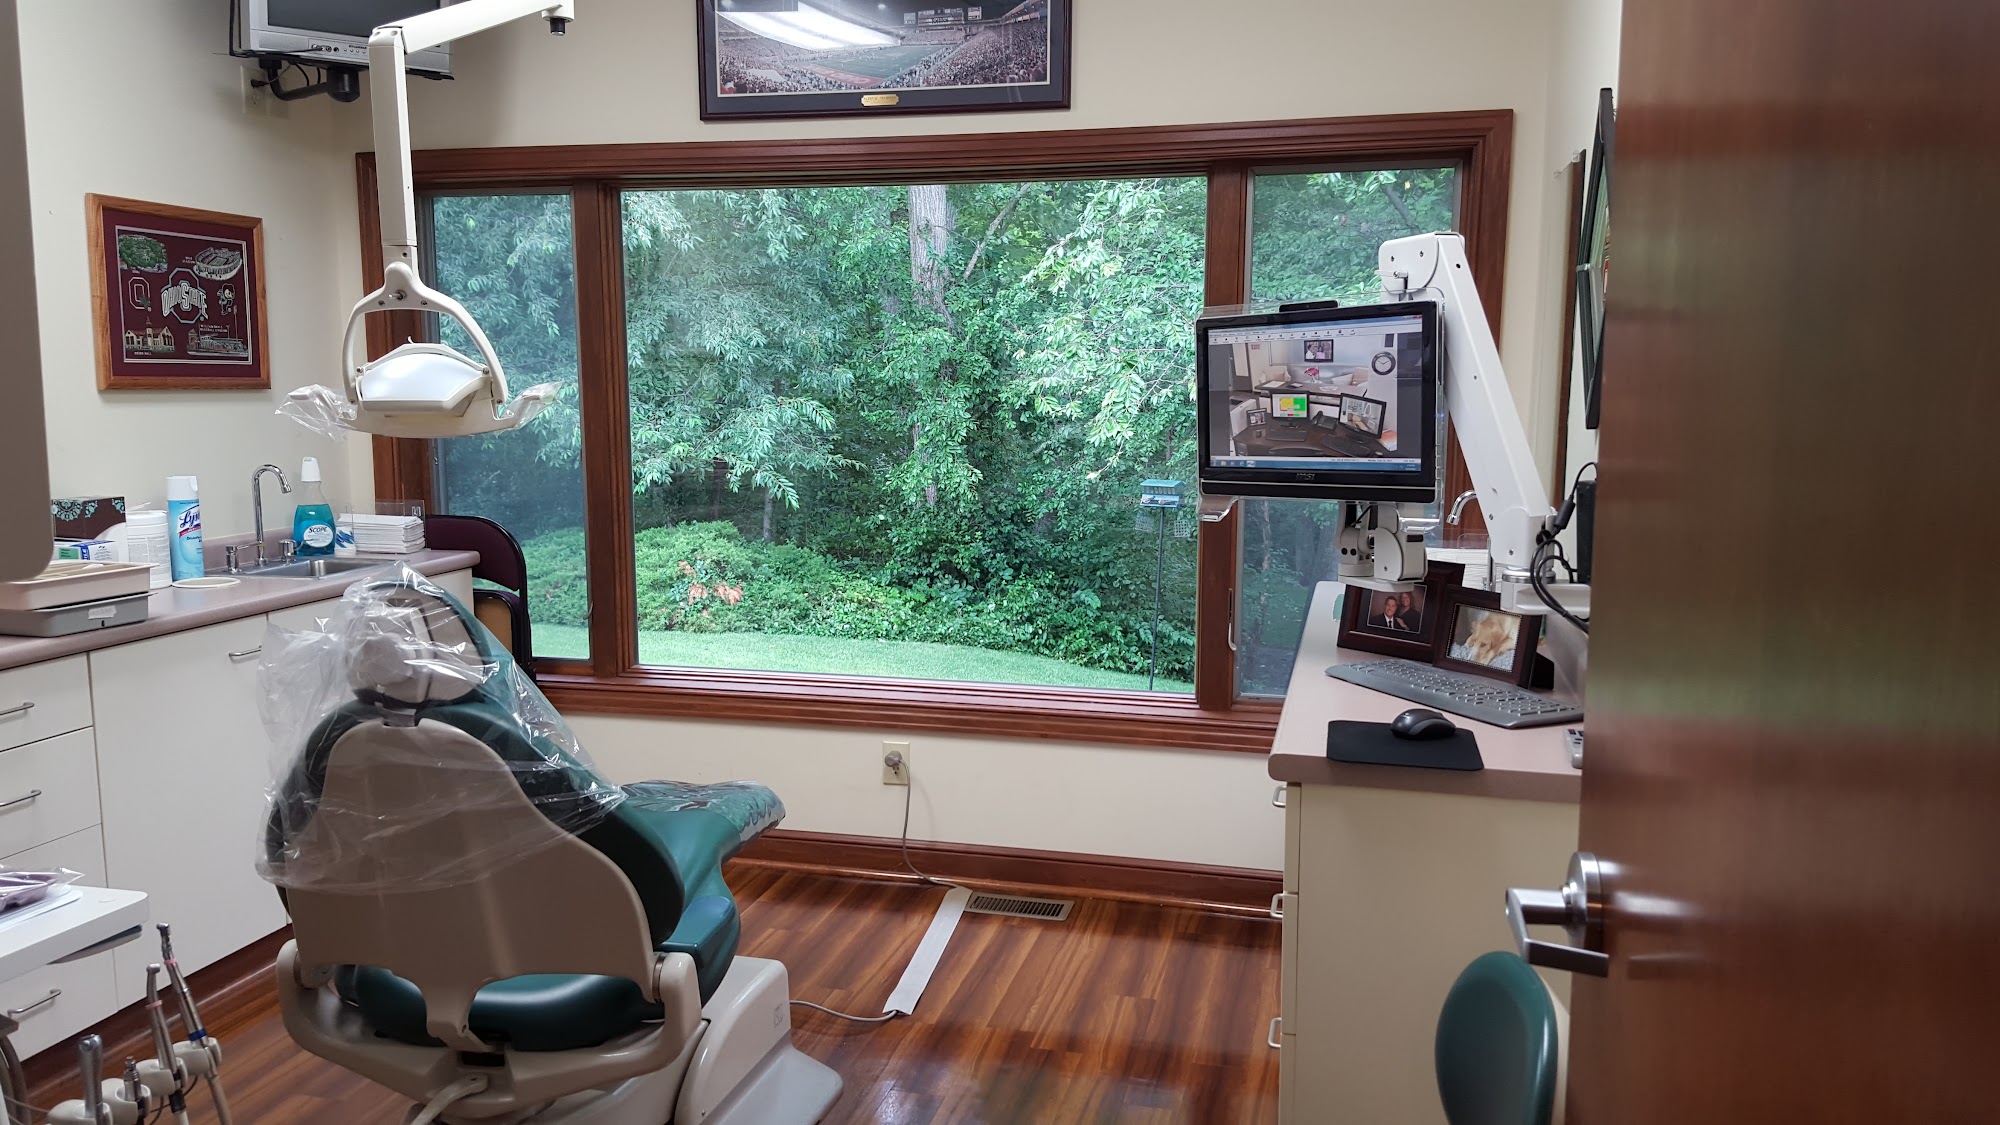 Ely, Dubos, and Stewart General Dentistry